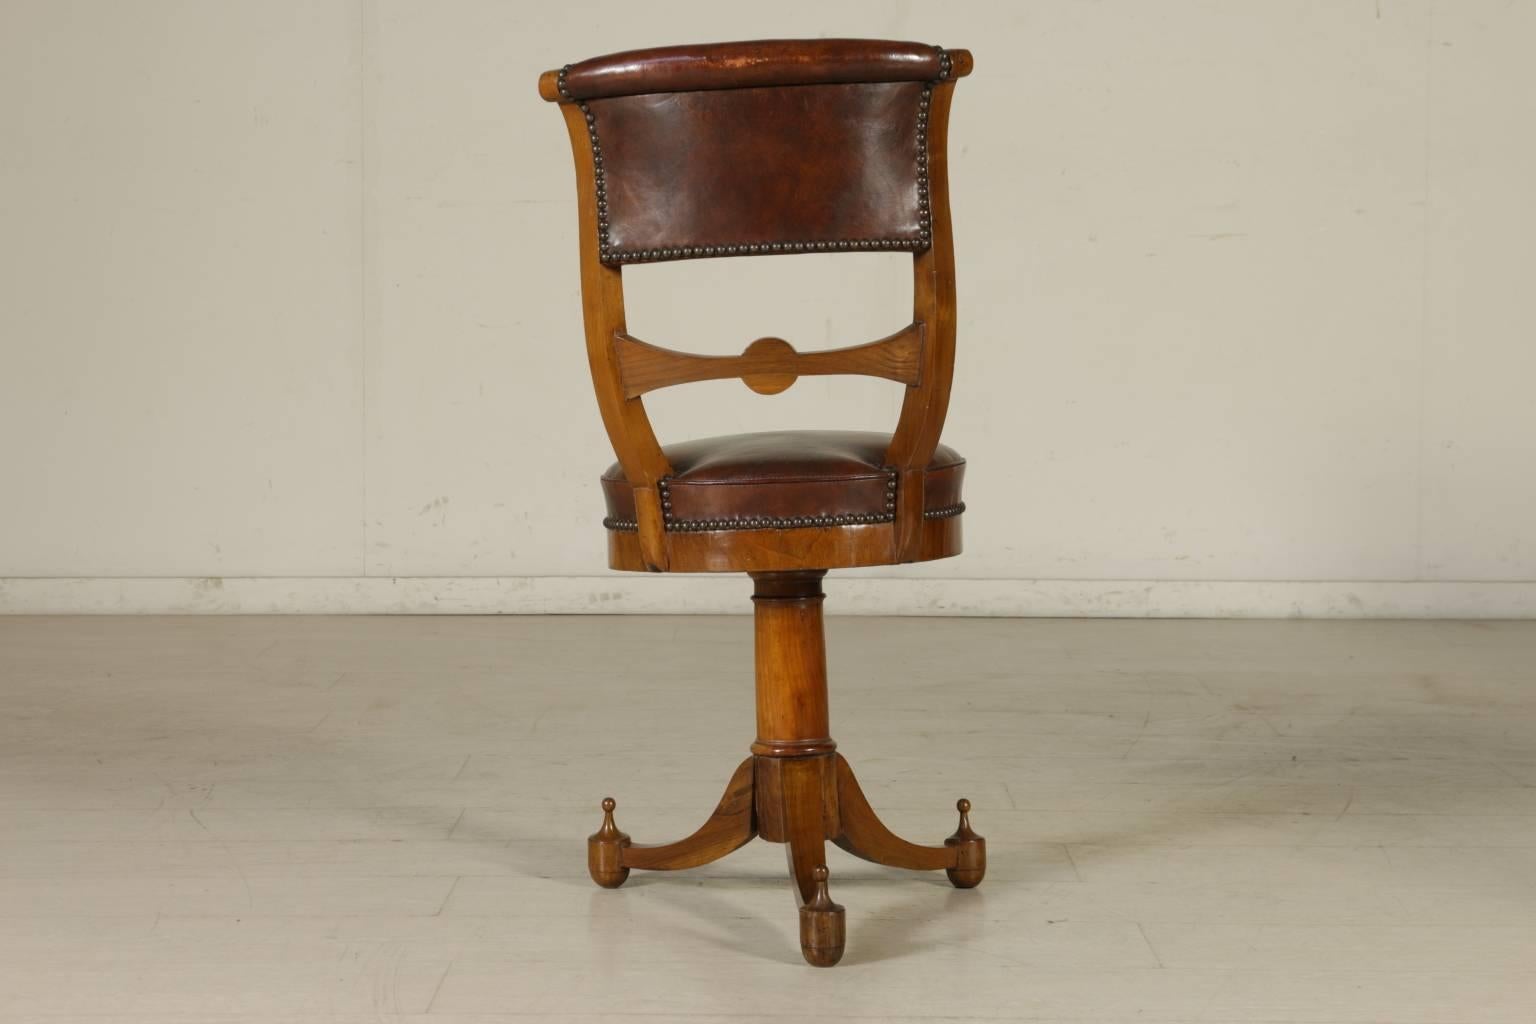 A group of four early 19th century Empire walnut and cherry music chairs with central baluster. Three turned legs ending in a tip. Round padded seats and padded open backrests. Imprinted and gilded leather seat and backrest with Napoleonic coat of